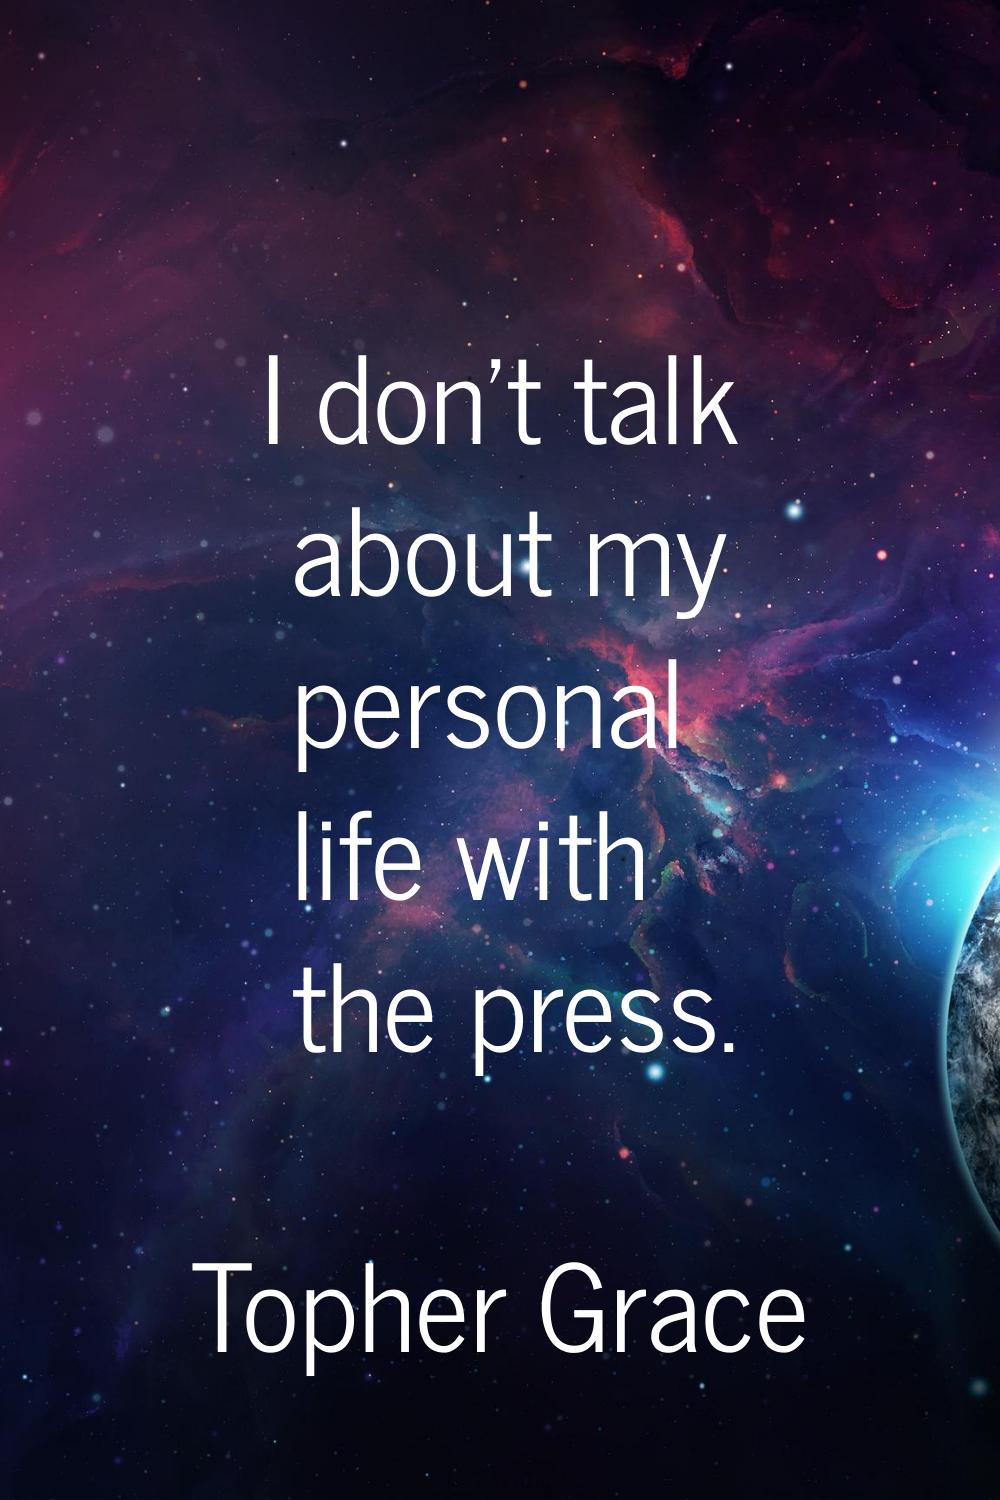 I don't talk about my personal life with the press.